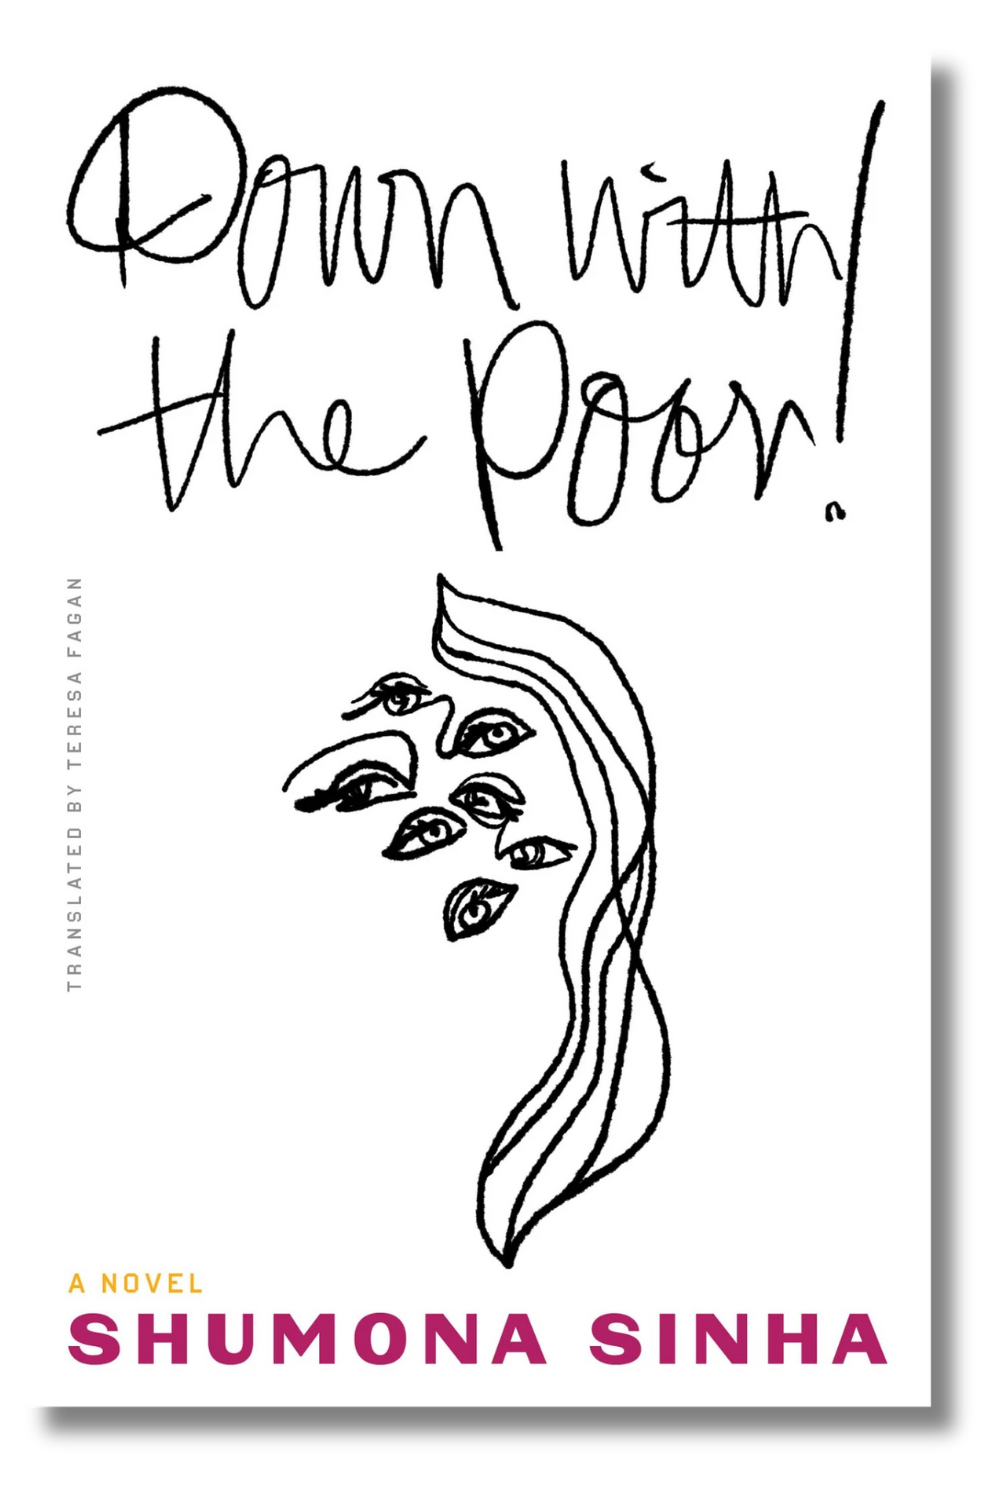 The cover of "Down with the Poor!" by Shumona Sinha, translated by Teresa Lavender Fagan